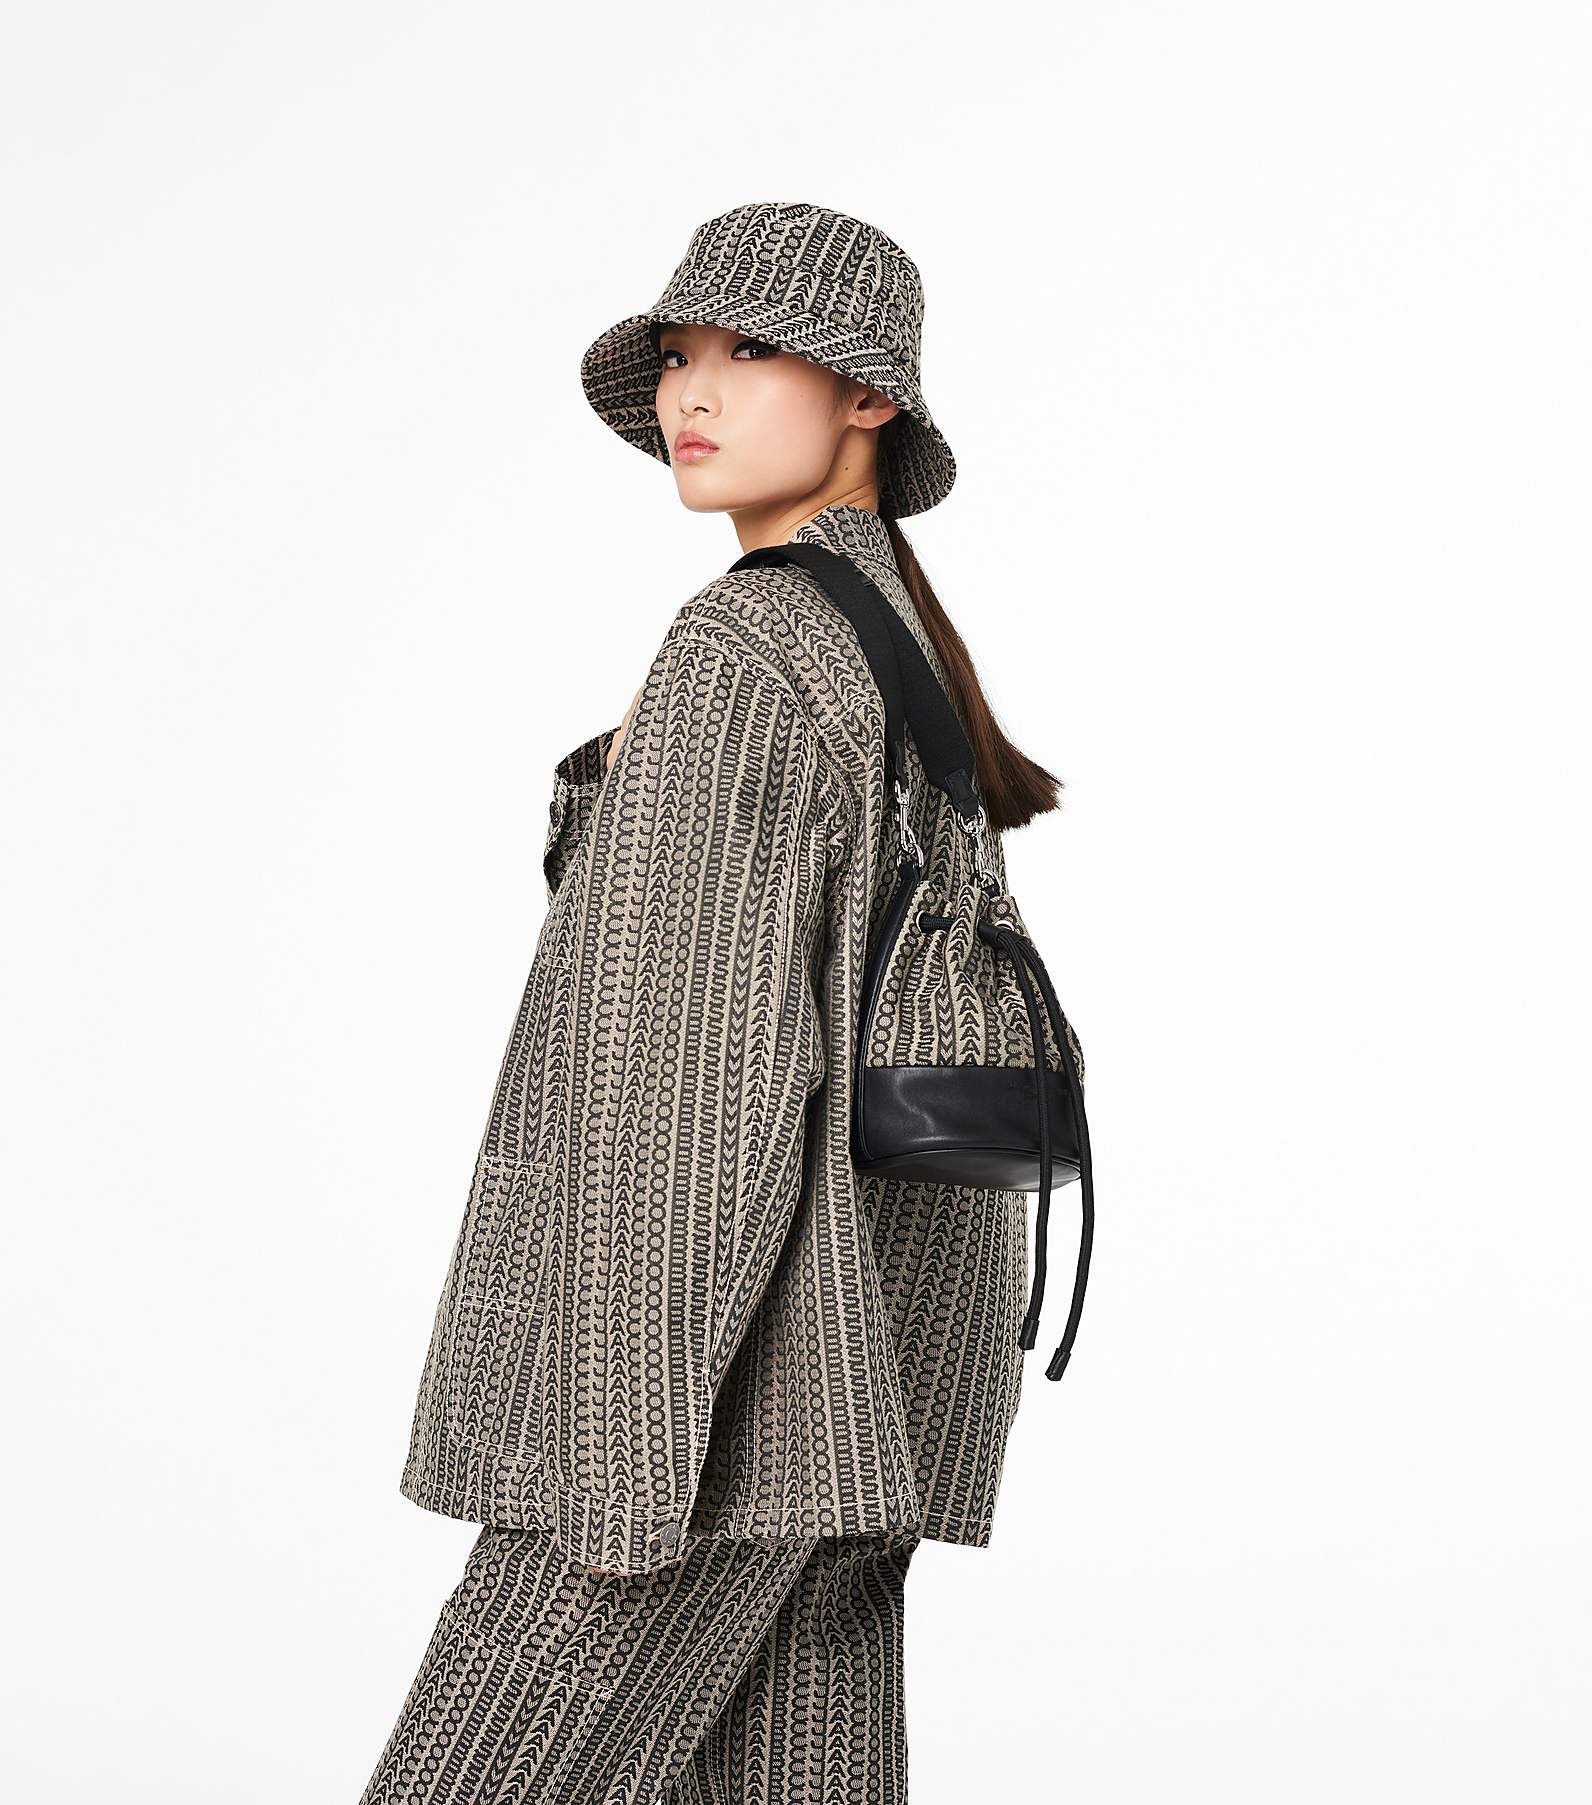 The Monogram Bucket Bag | Marc Jacobs | Official Site